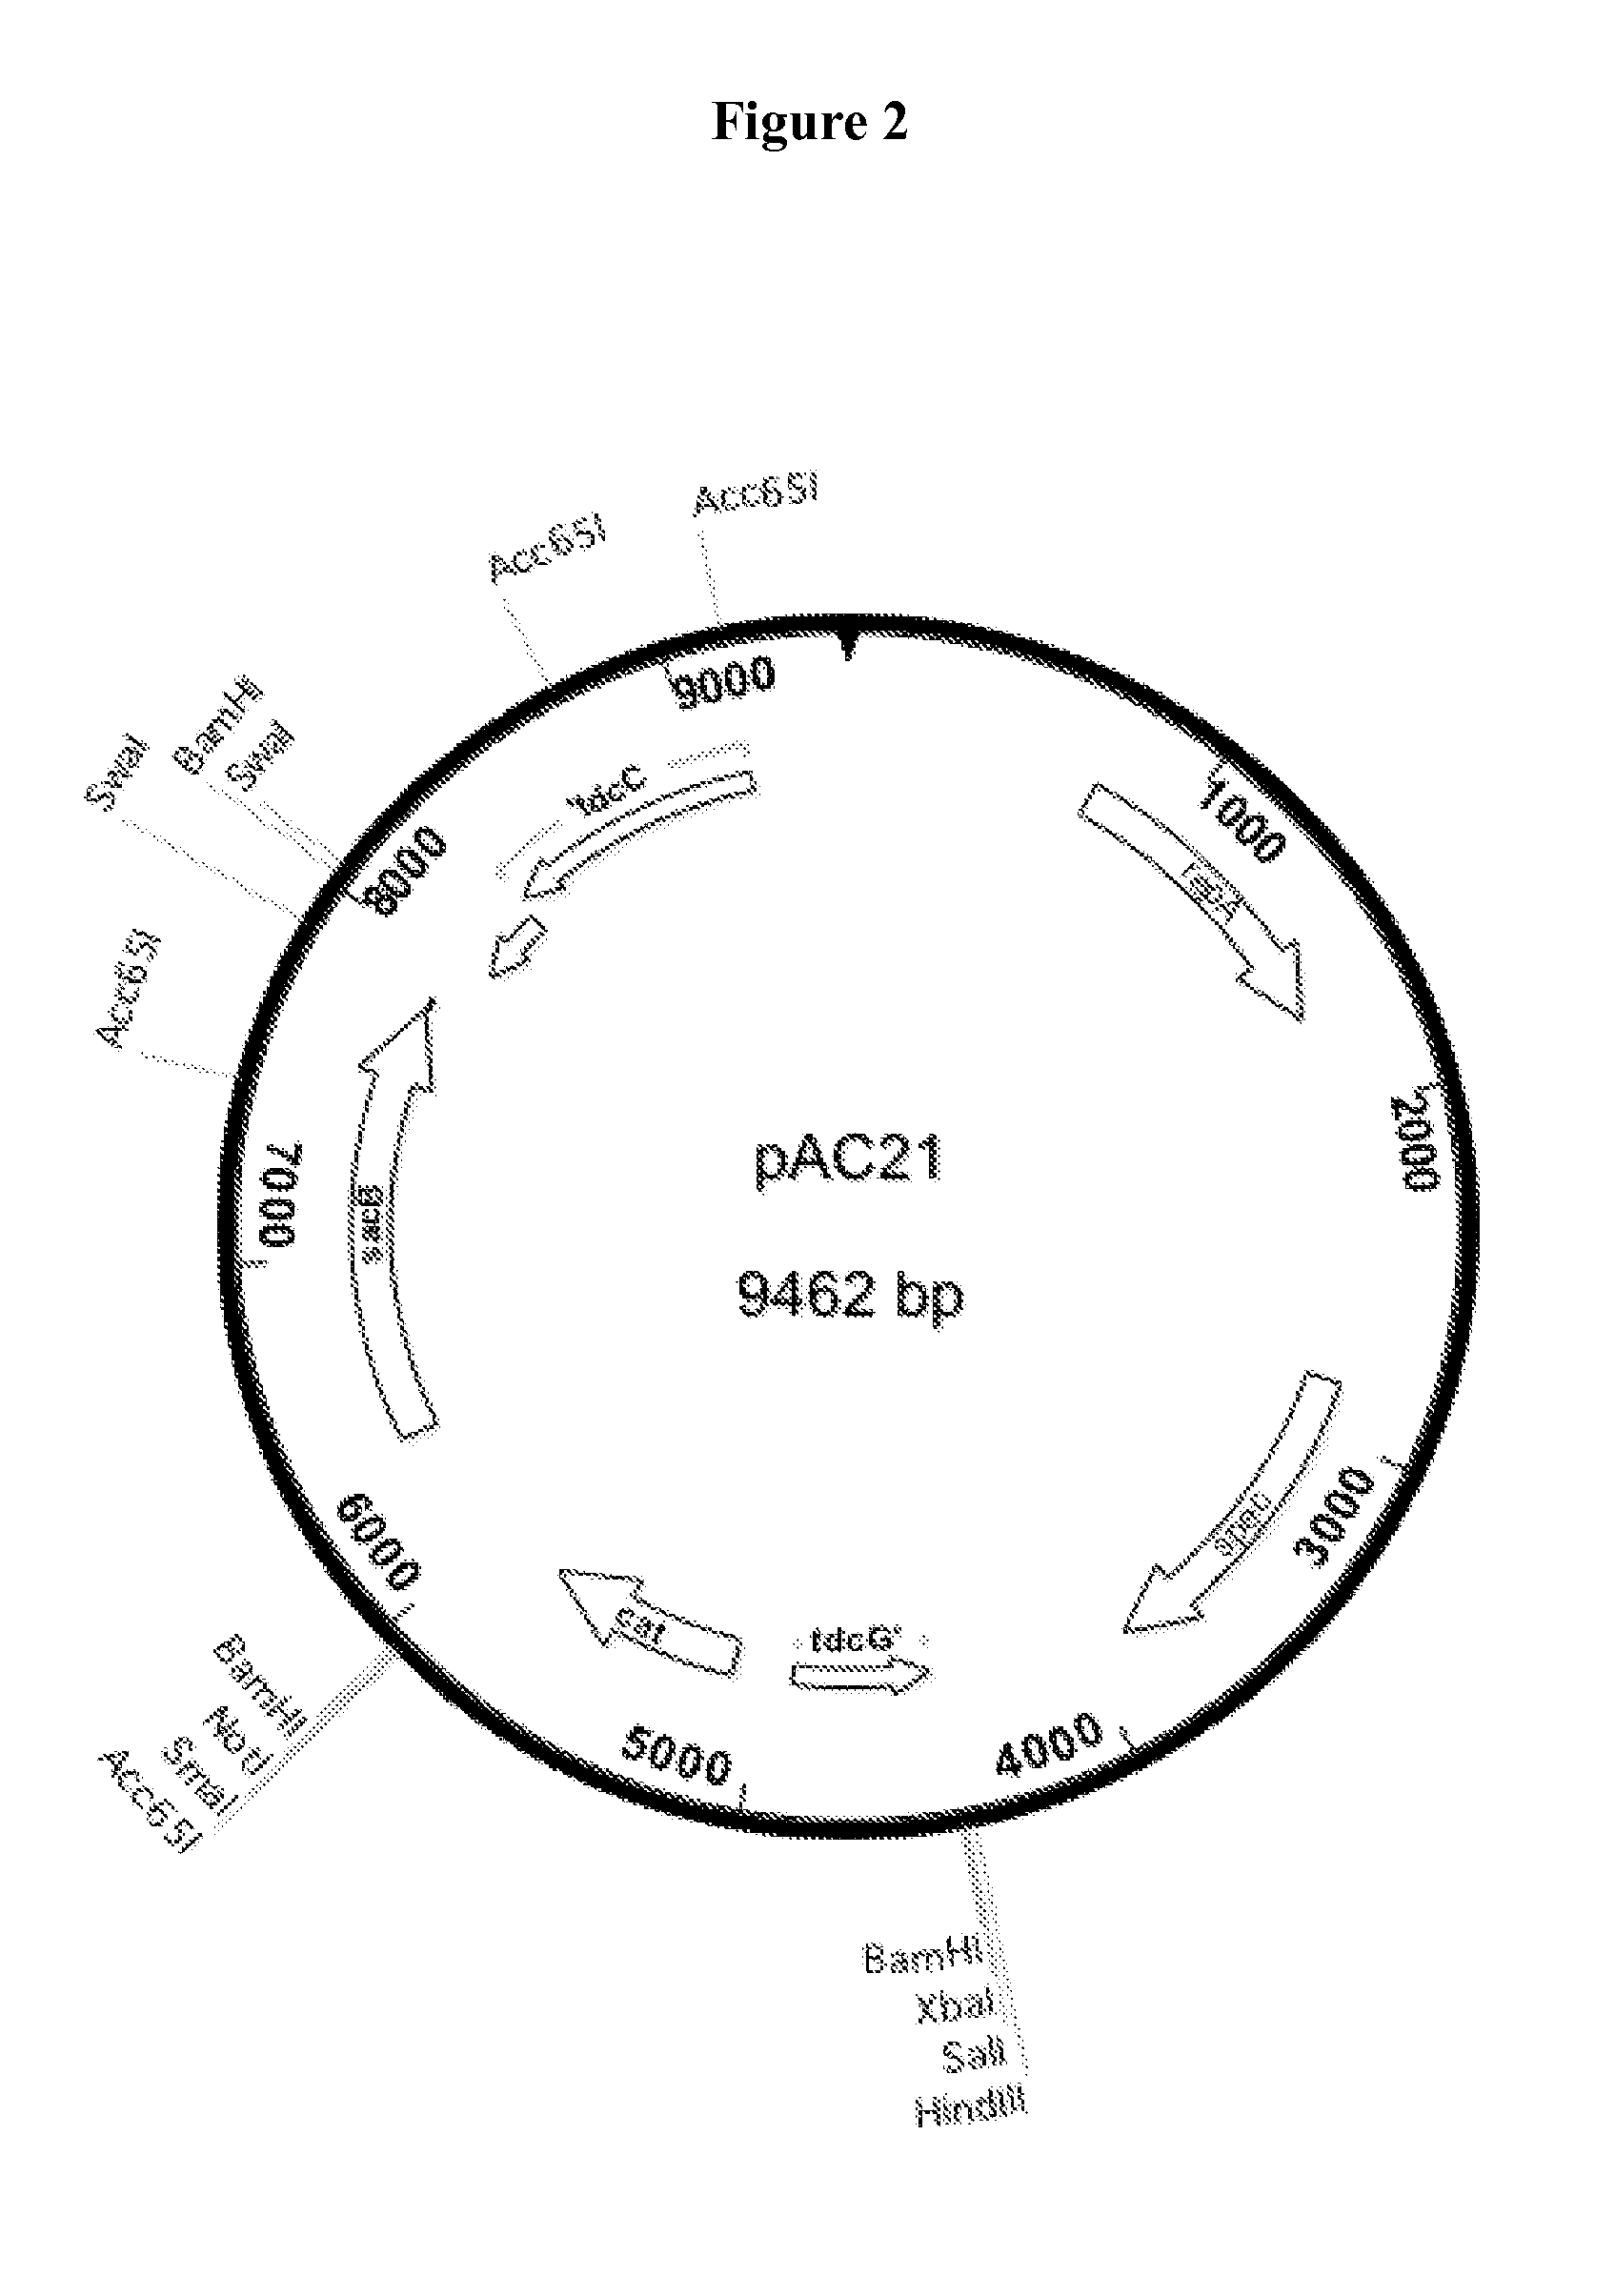 Method of producing succinic acid and other chemiclas using facilitated diffusion for sugar import